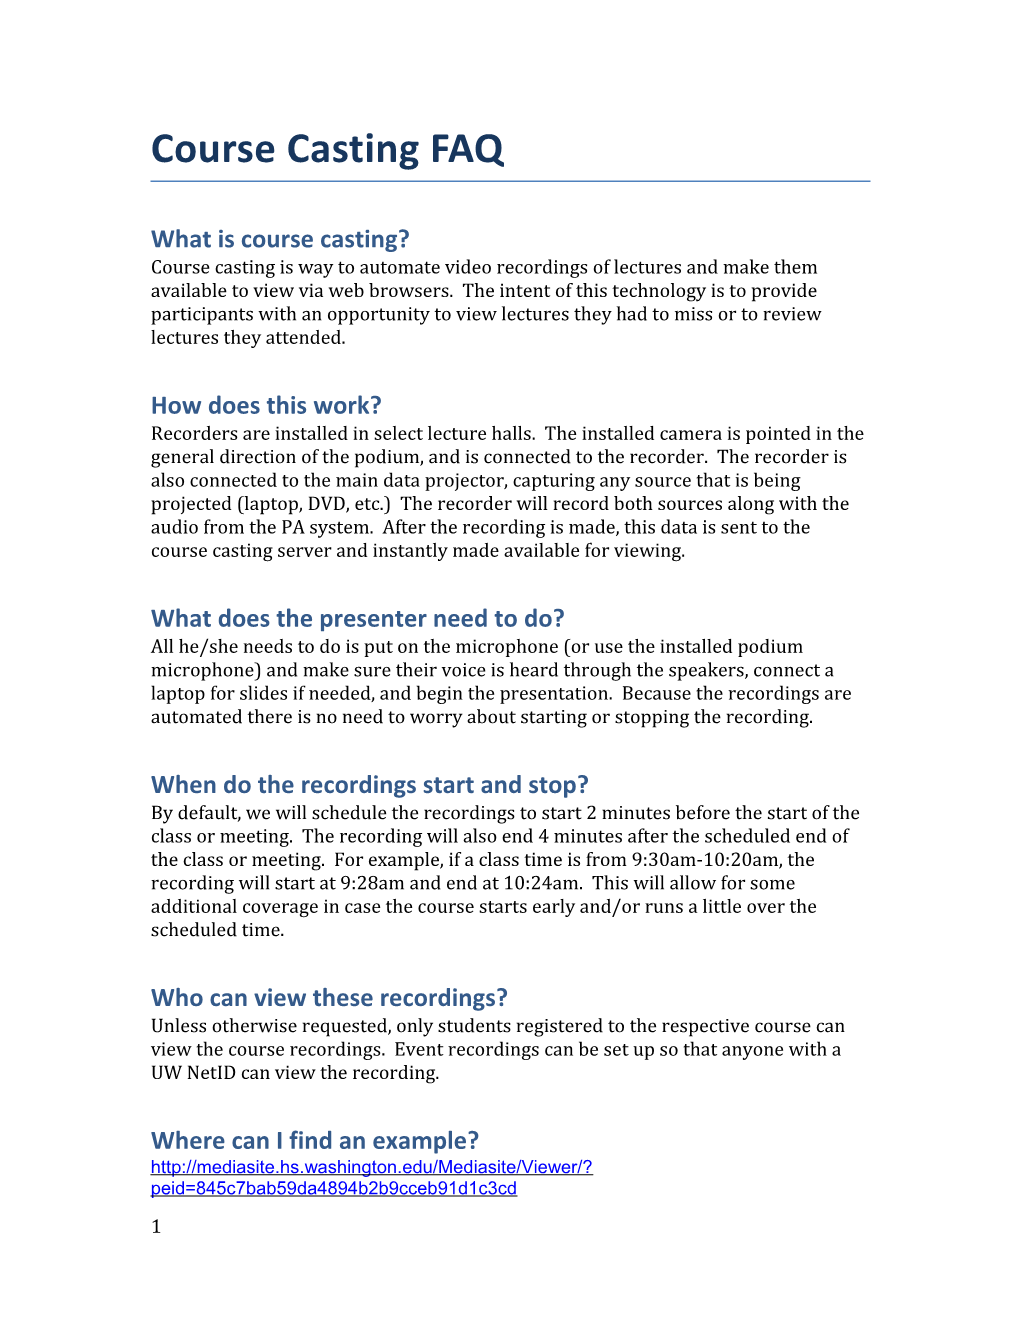 What Is Course Casting?